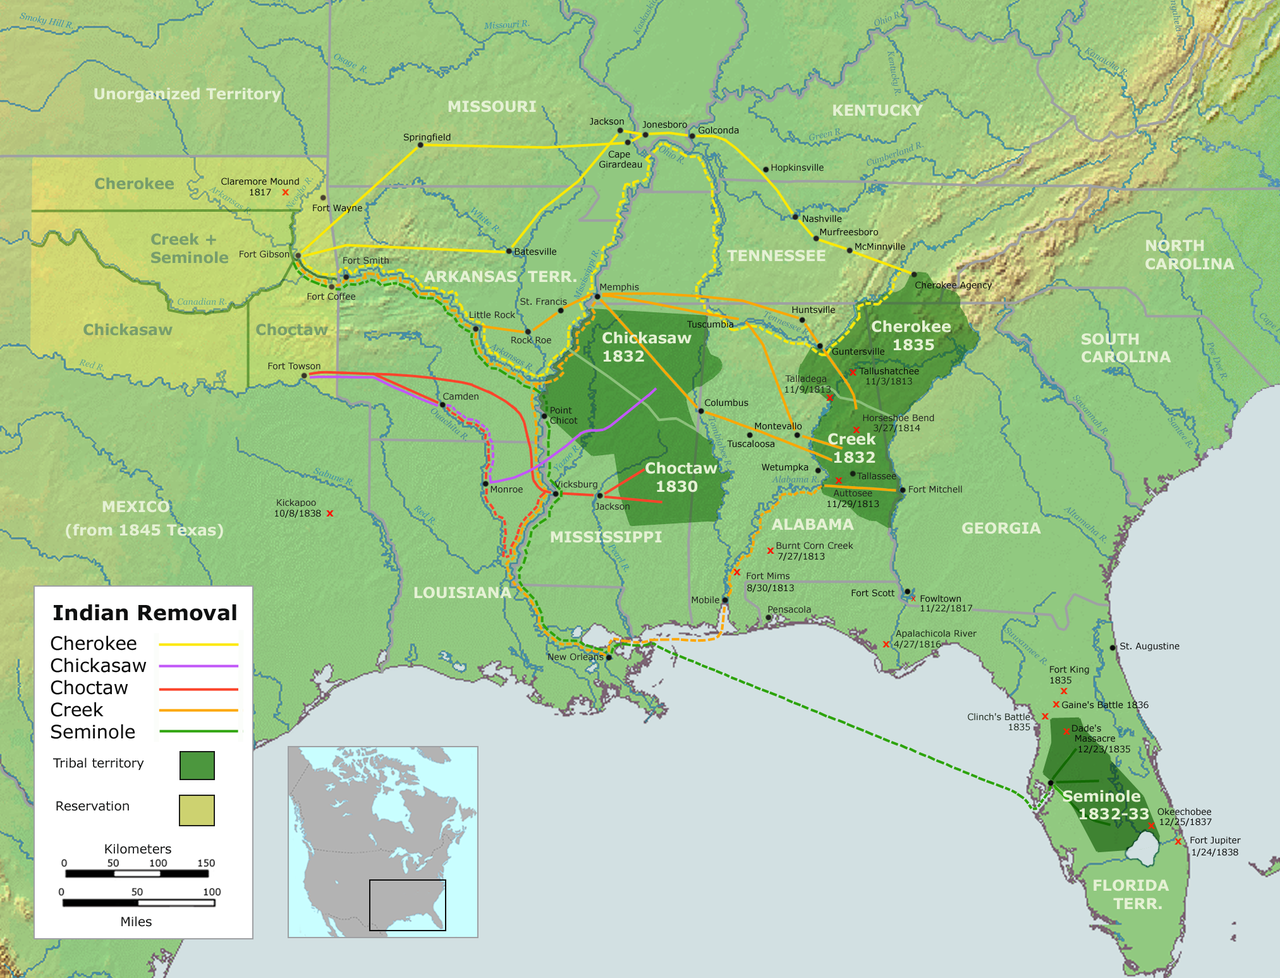 [Source: commons.wikimedia.org. Map of the route of the Trails of Tears — depicting the route taken to relocate Native Americans from the Southeastern United States between 1836 and 1839 to the Indian Territory (present-day Oklahoma). work by Nikater.]